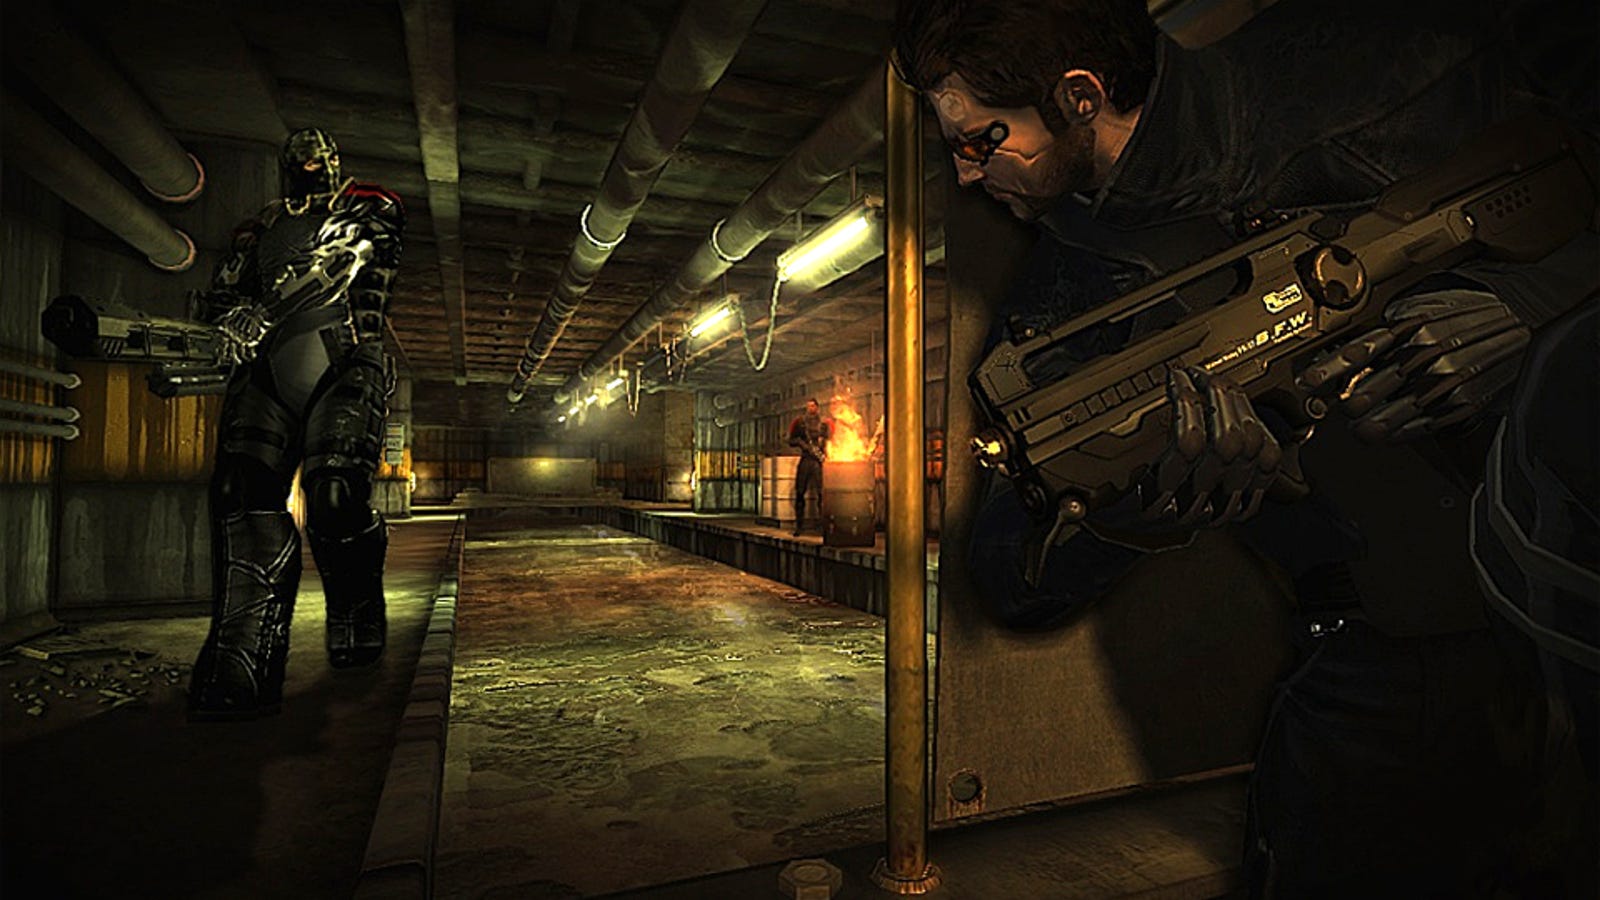 Deus Ex: Human Revolution Gets Deal to Be the Next Big Video Game Movie